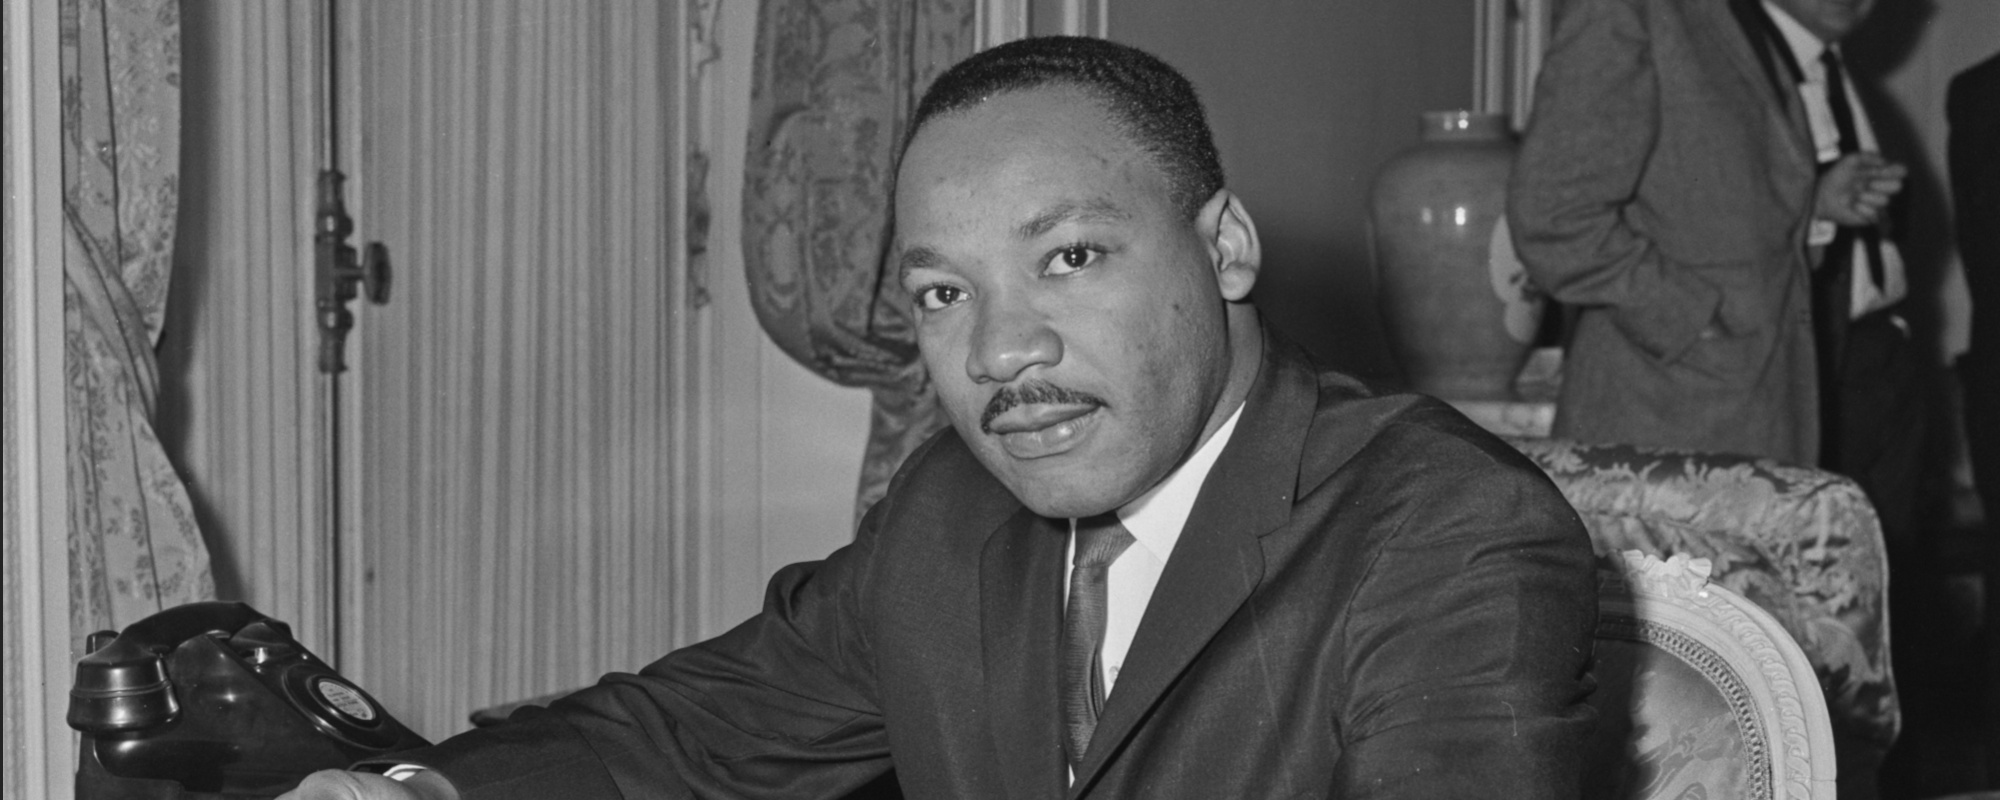 Artists and Musicians Celebrate Martin Luther King Jr. Day